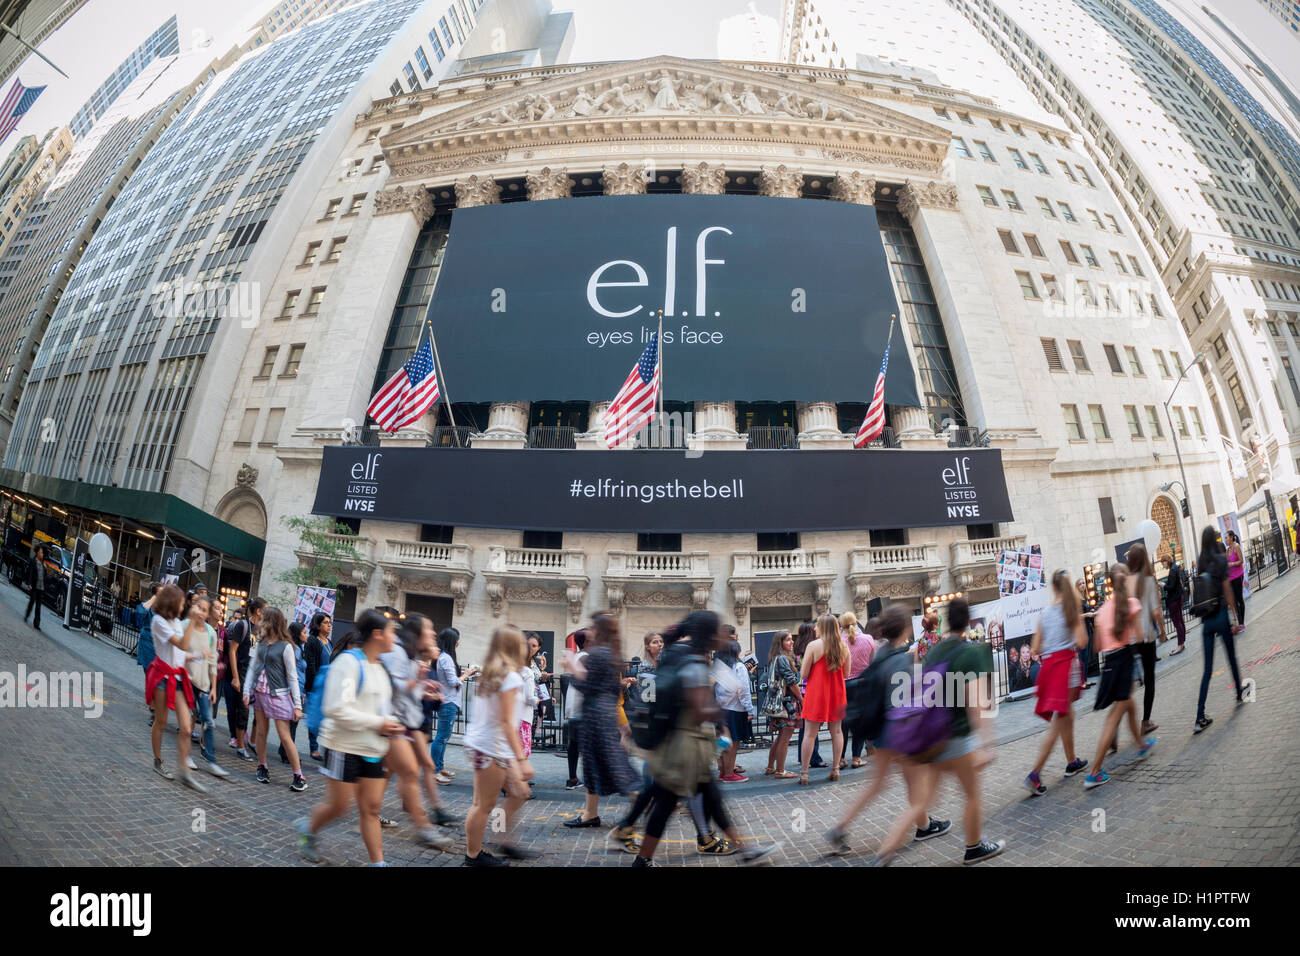 How e.l.f. Cosmetics is using personalization to drive e-commerce